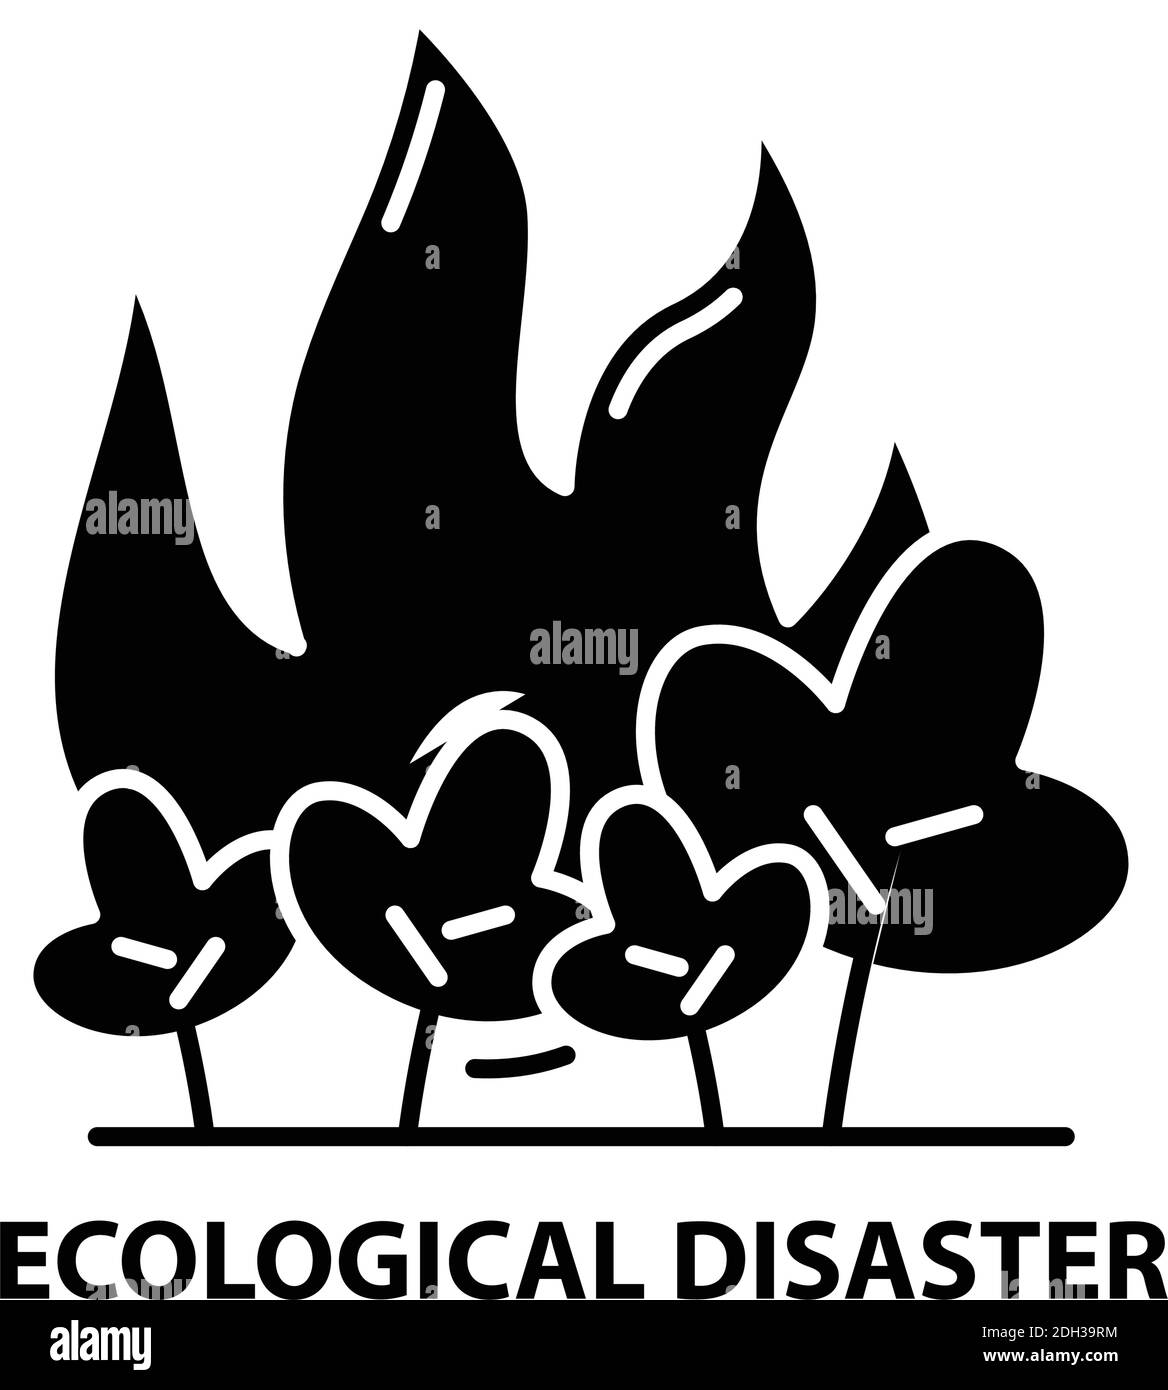 ecological disaster icon, black vector sign with editable strokes, concept illustration Stock Vector